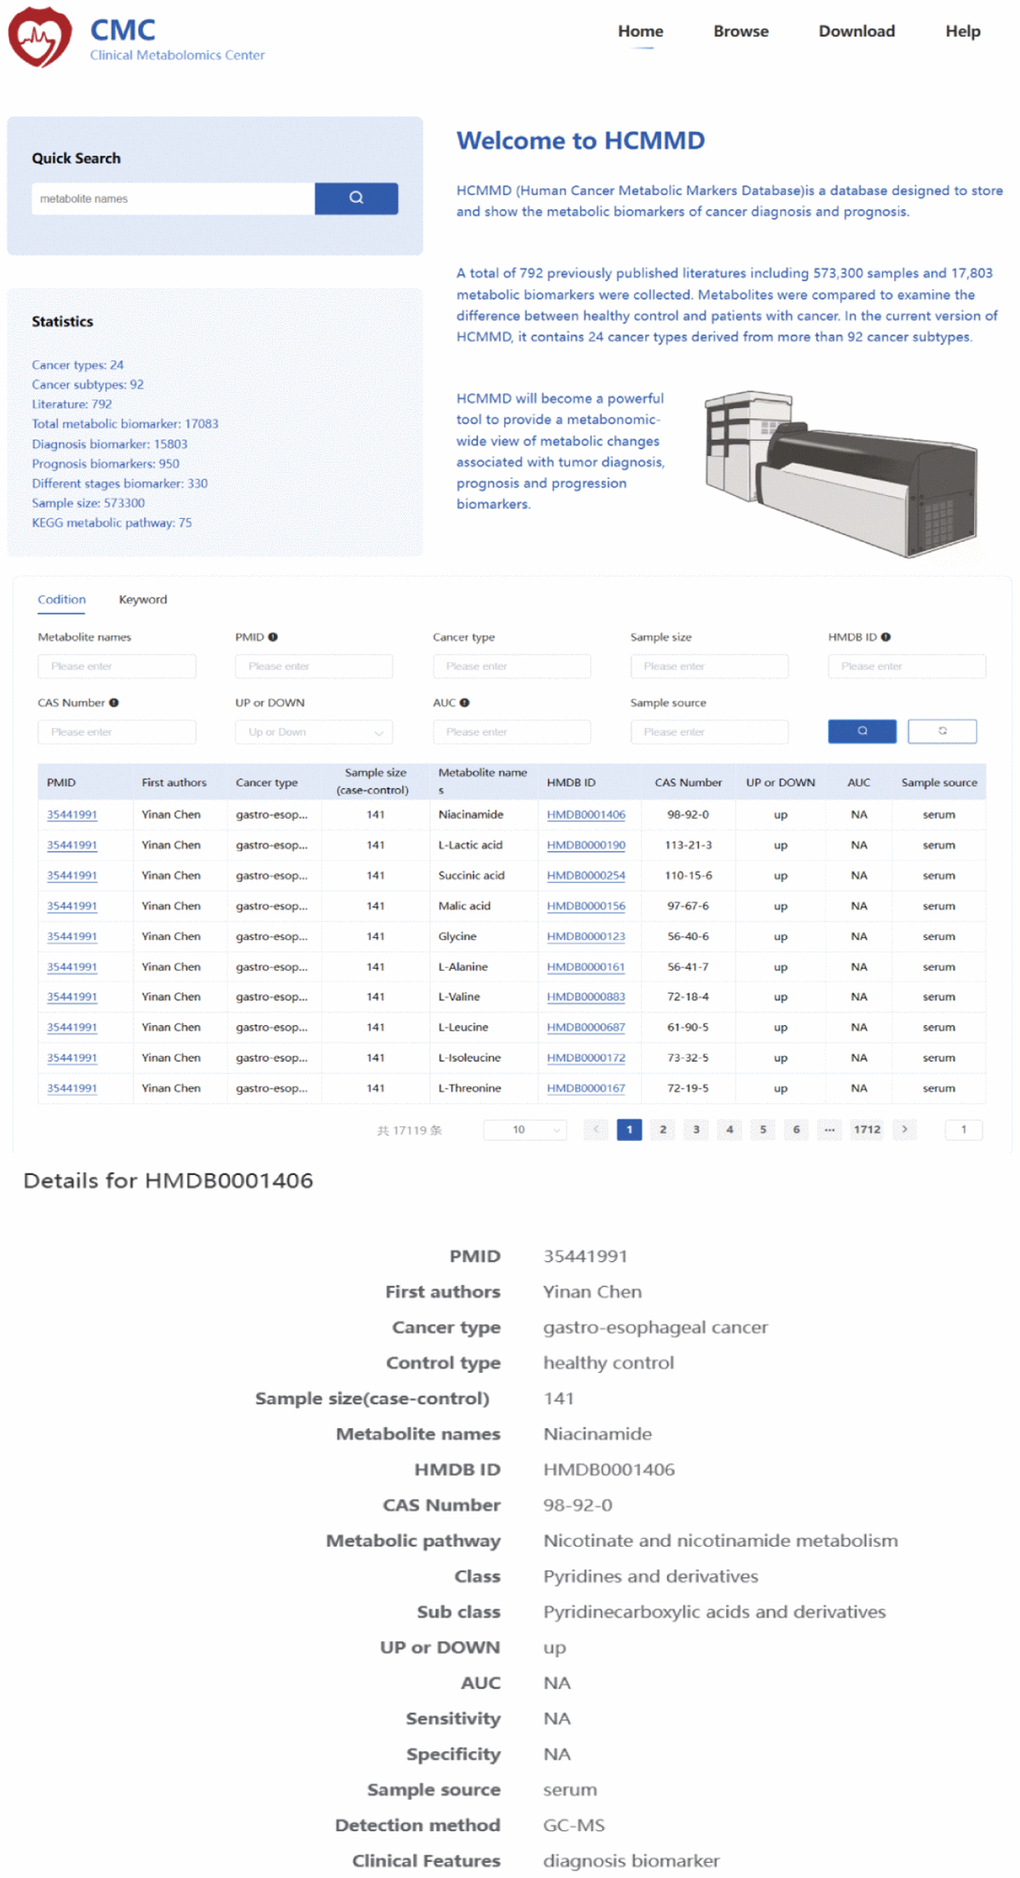 The web interface of the HCMMD database.